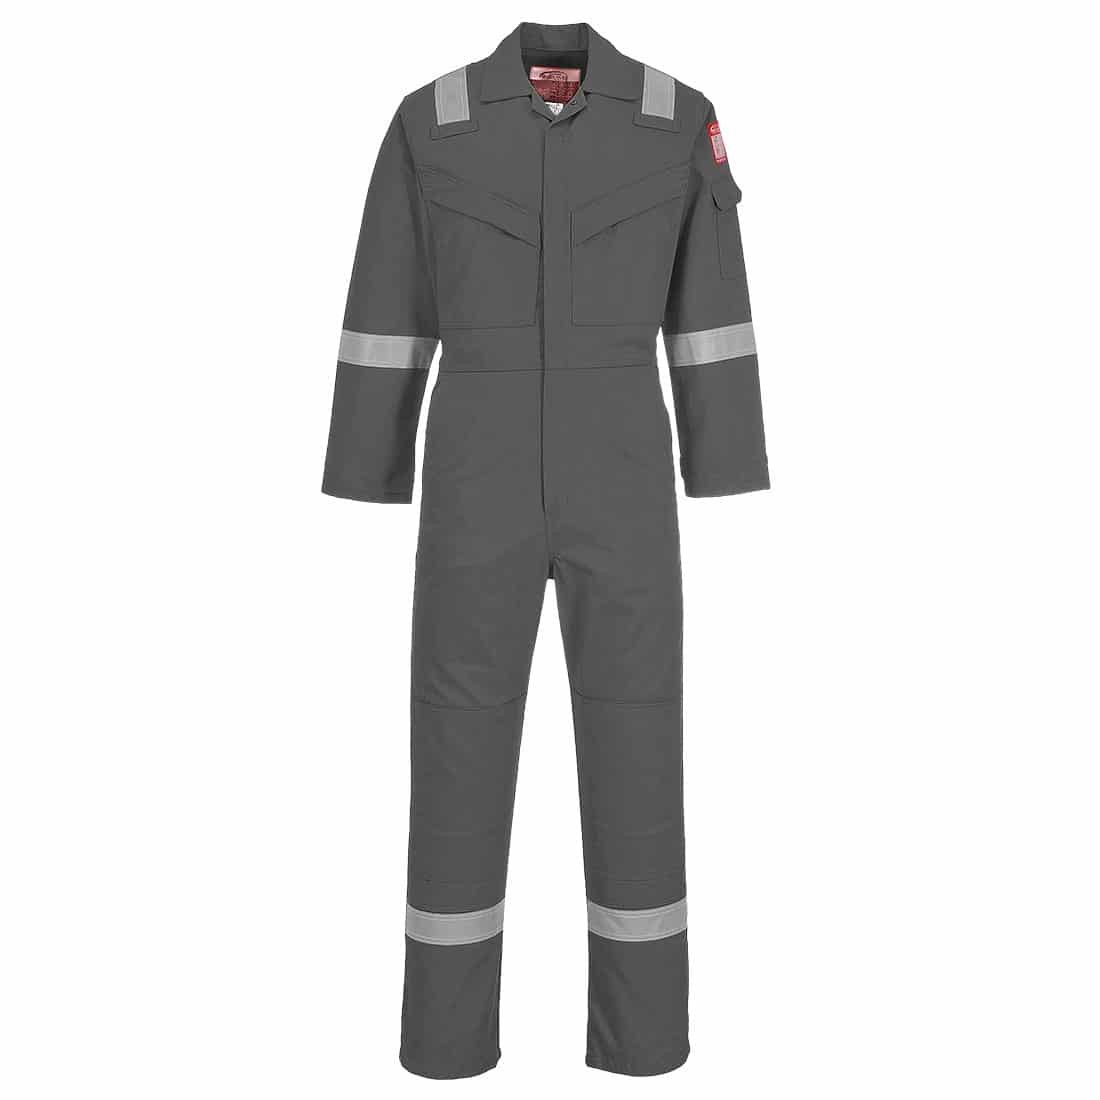 Portwest FR Antistatic Super Light Weight Coverall